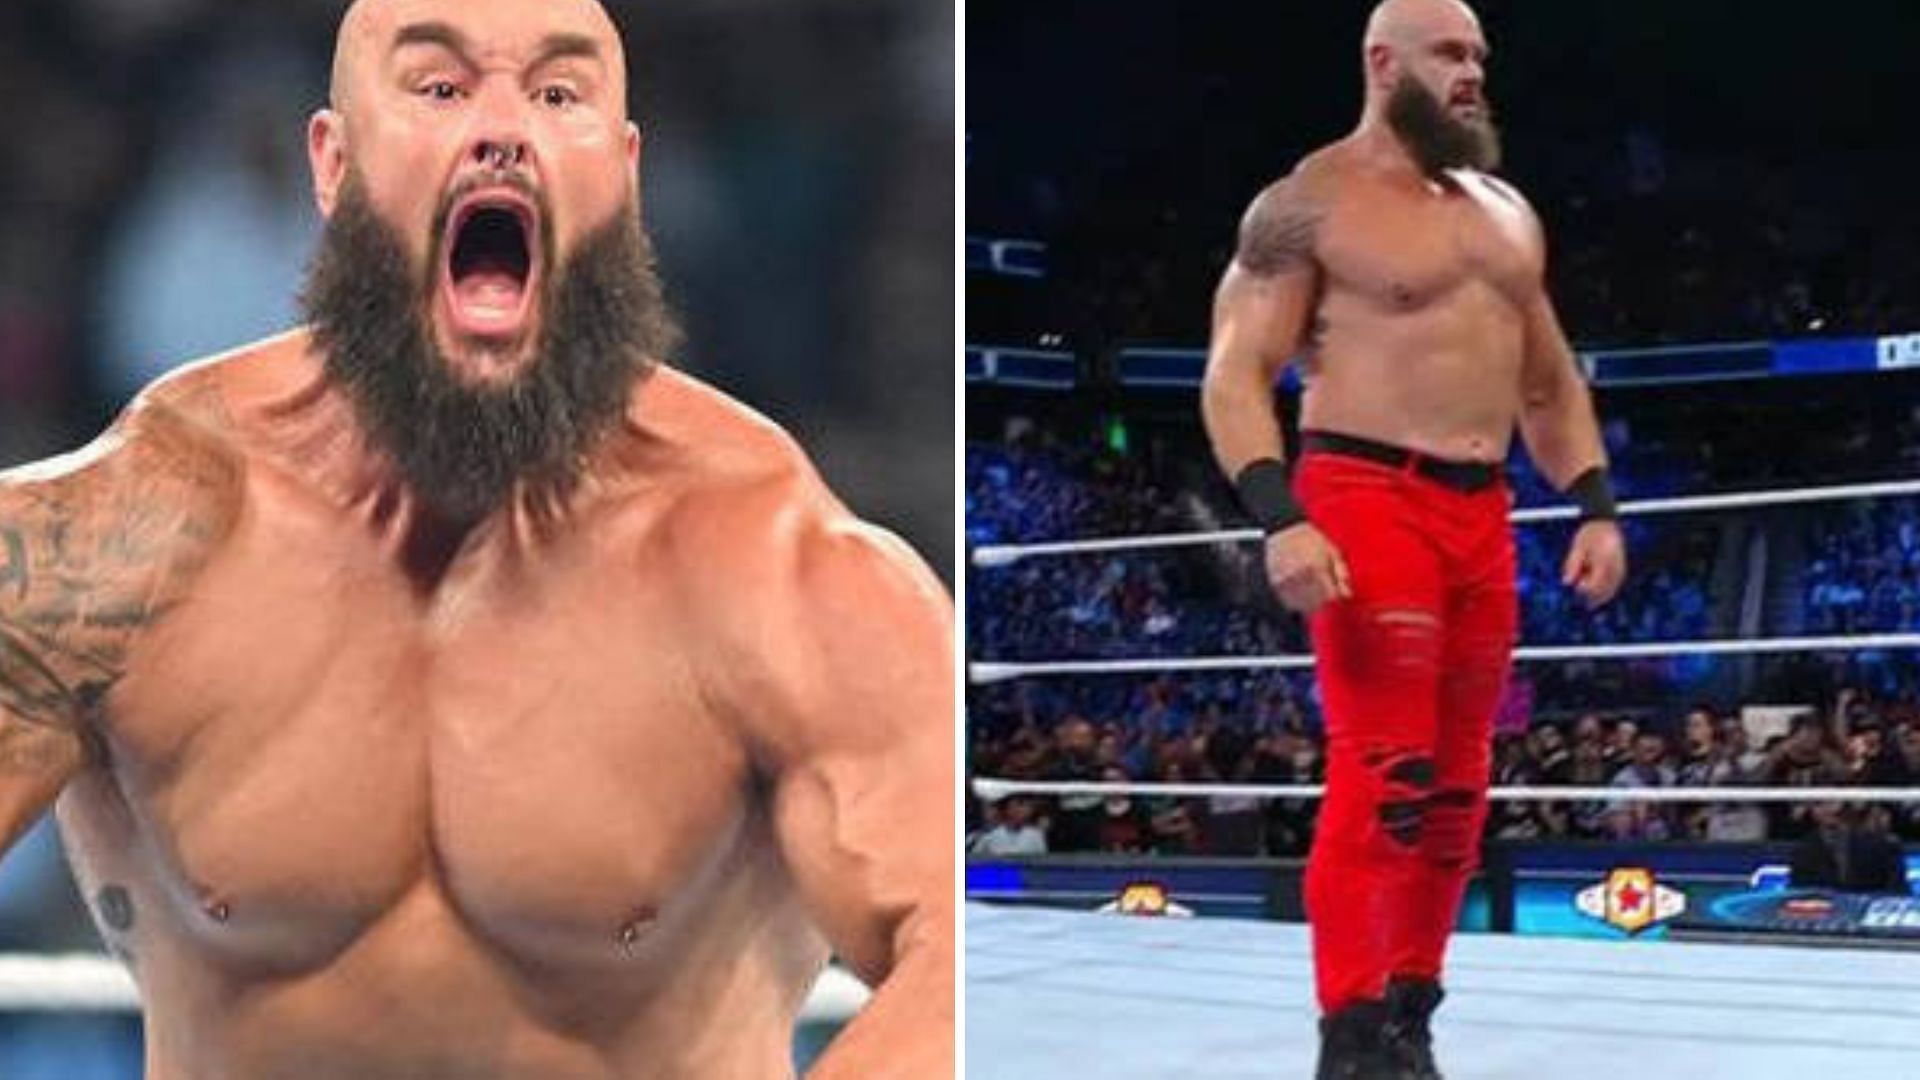 Strowman has been on a rampage ever since returning to WWE.